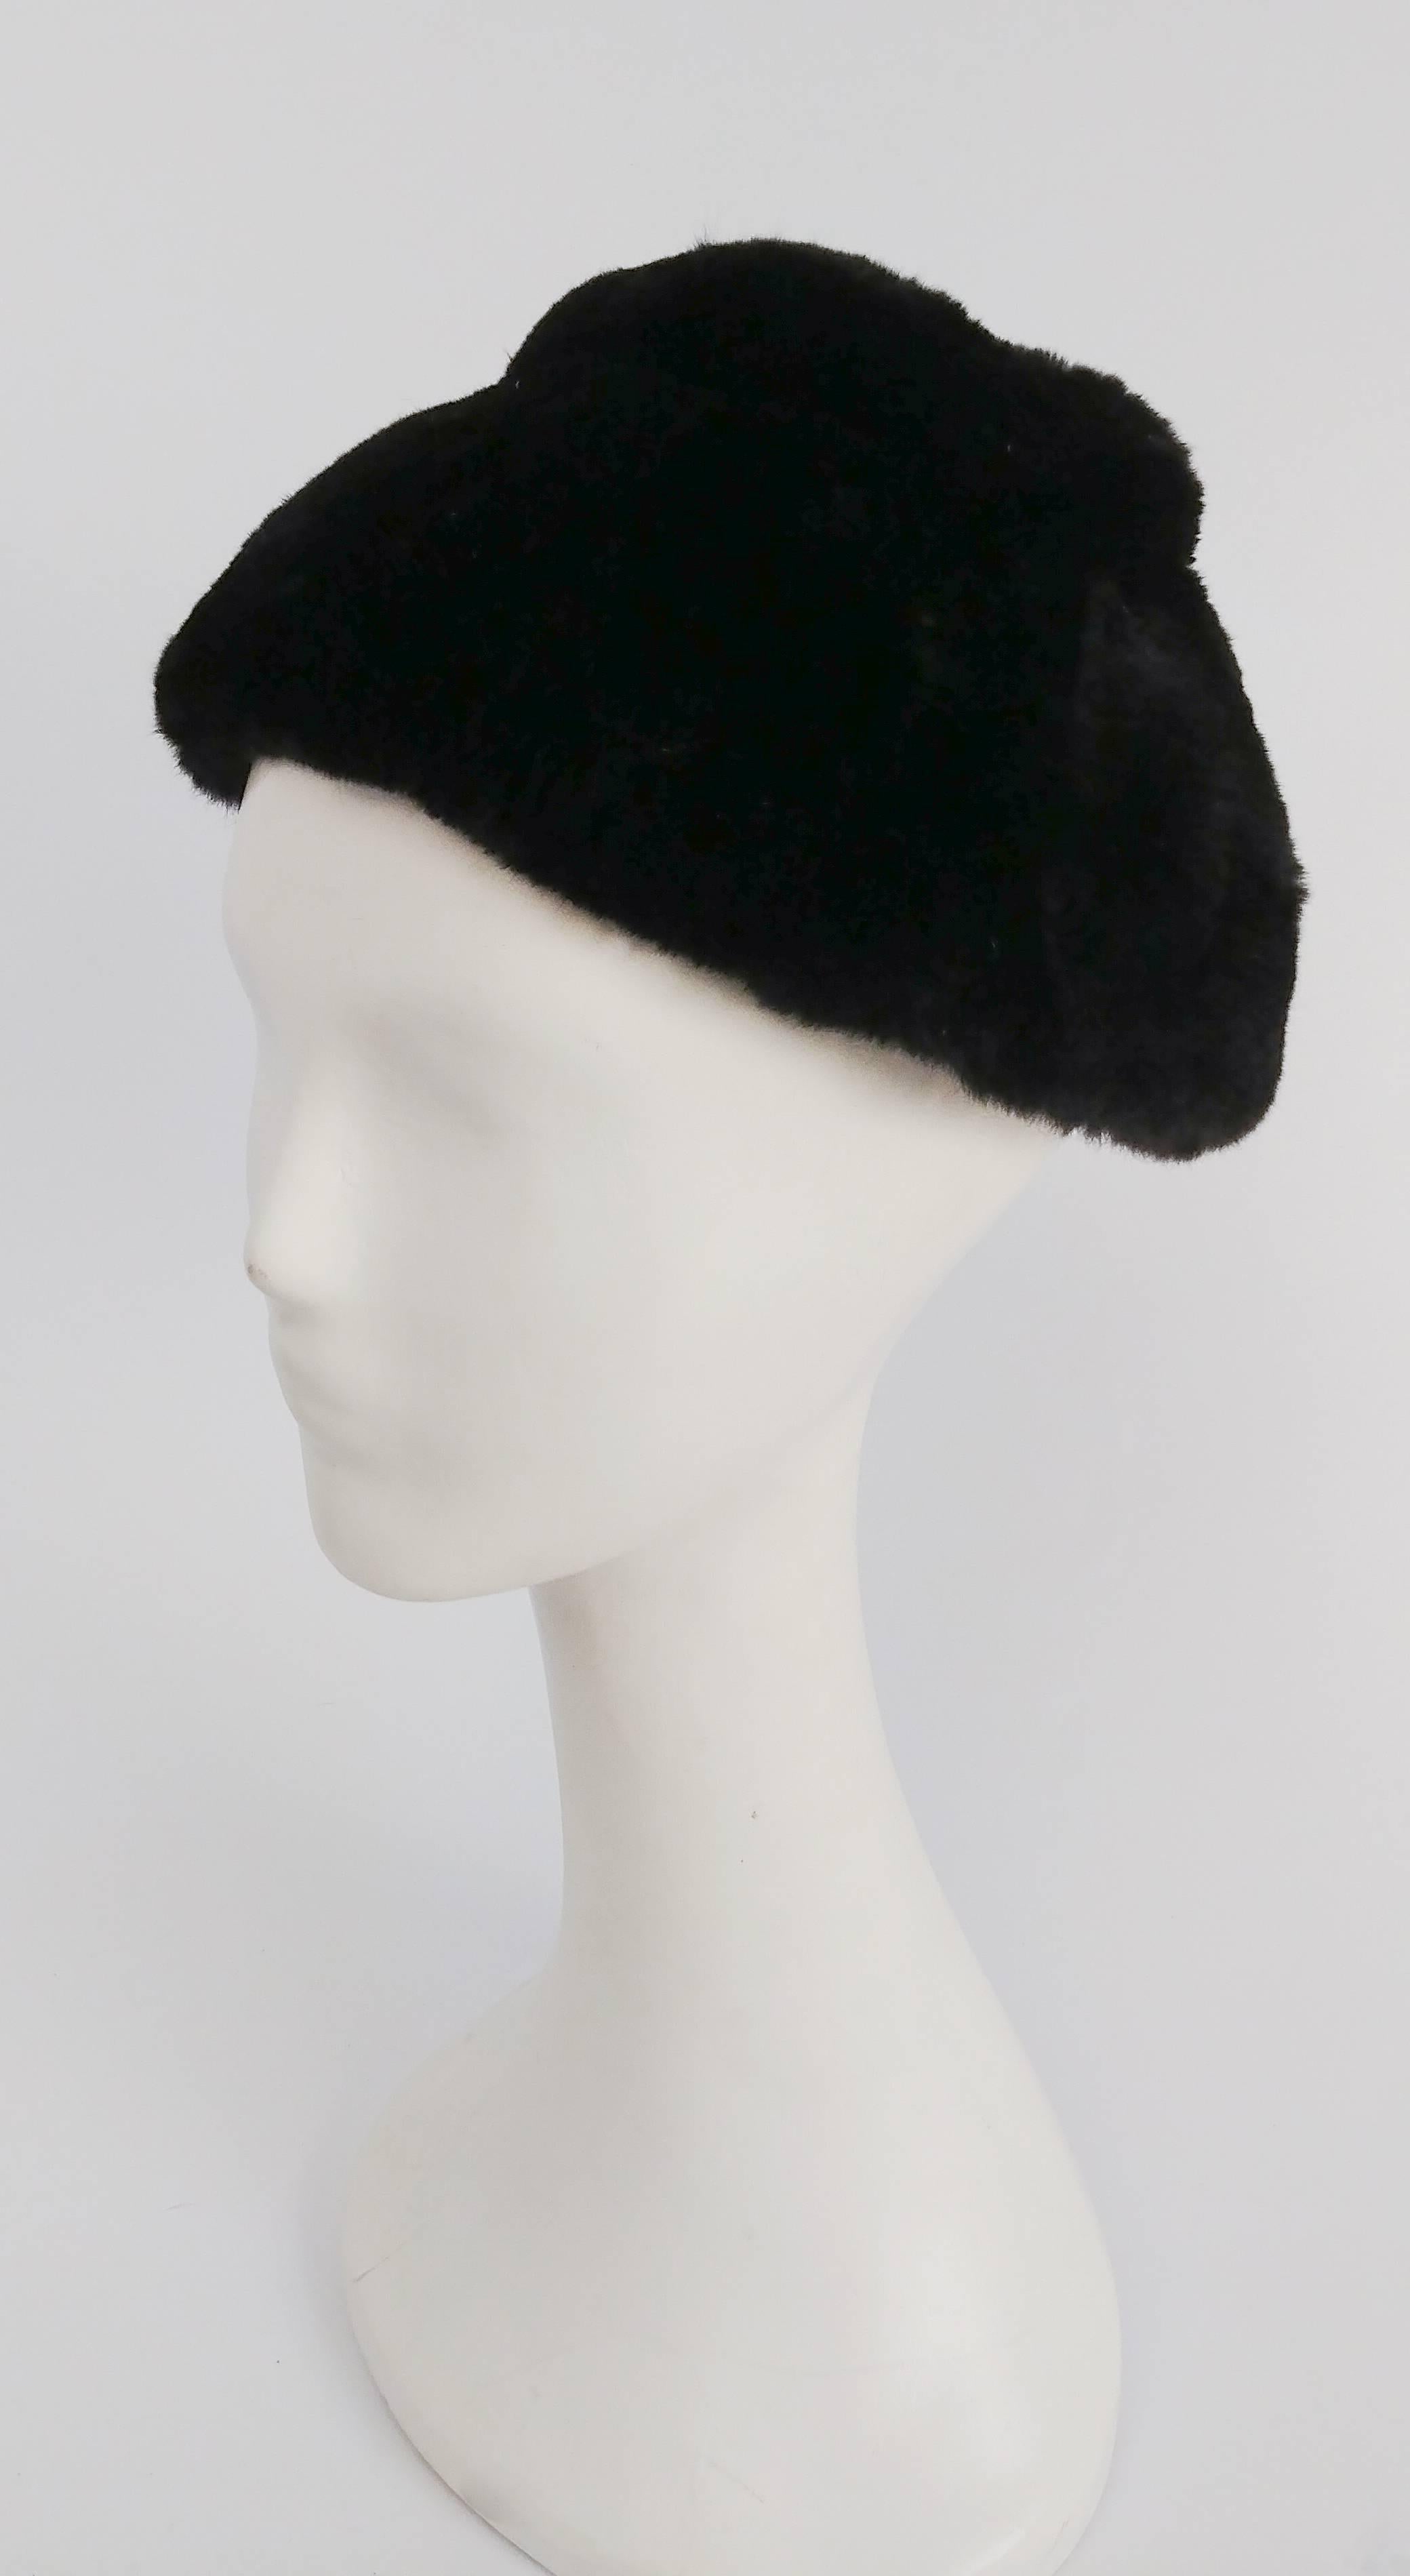 1960s Irene of New York Shorn Mink Hat. Perch on back of head for true 1960s flair. 